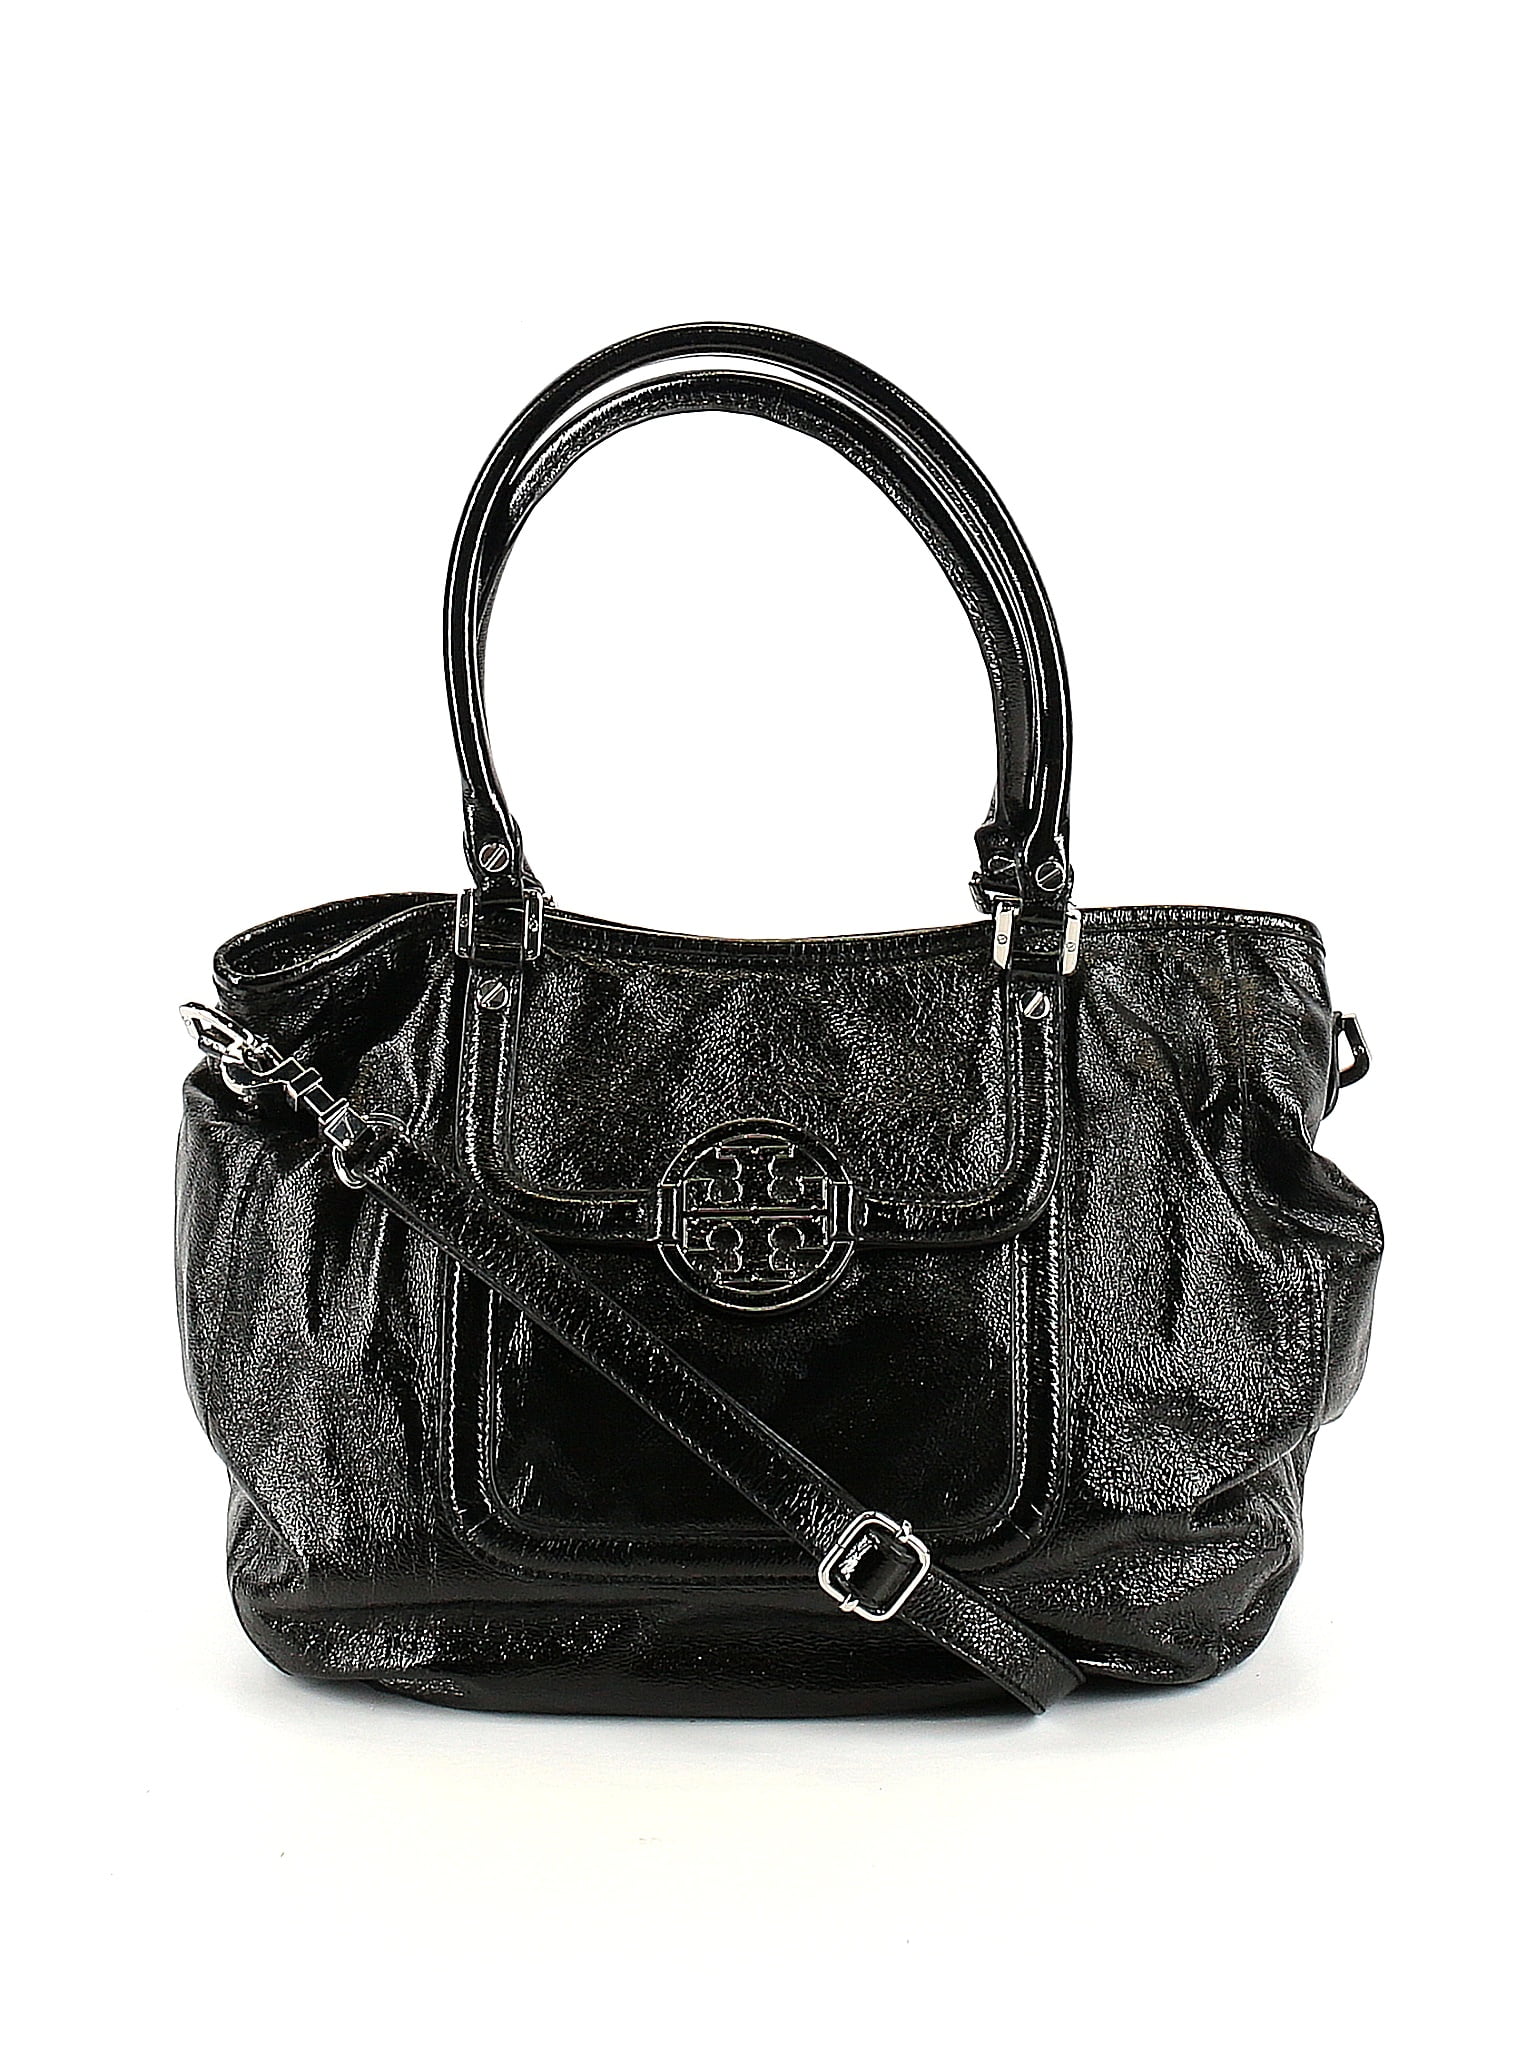 Buy Pre-Owned Tory Burch Womens One Size Fits All Satchel Online at Lowest  Price in Ubuy Qatar. 326397912